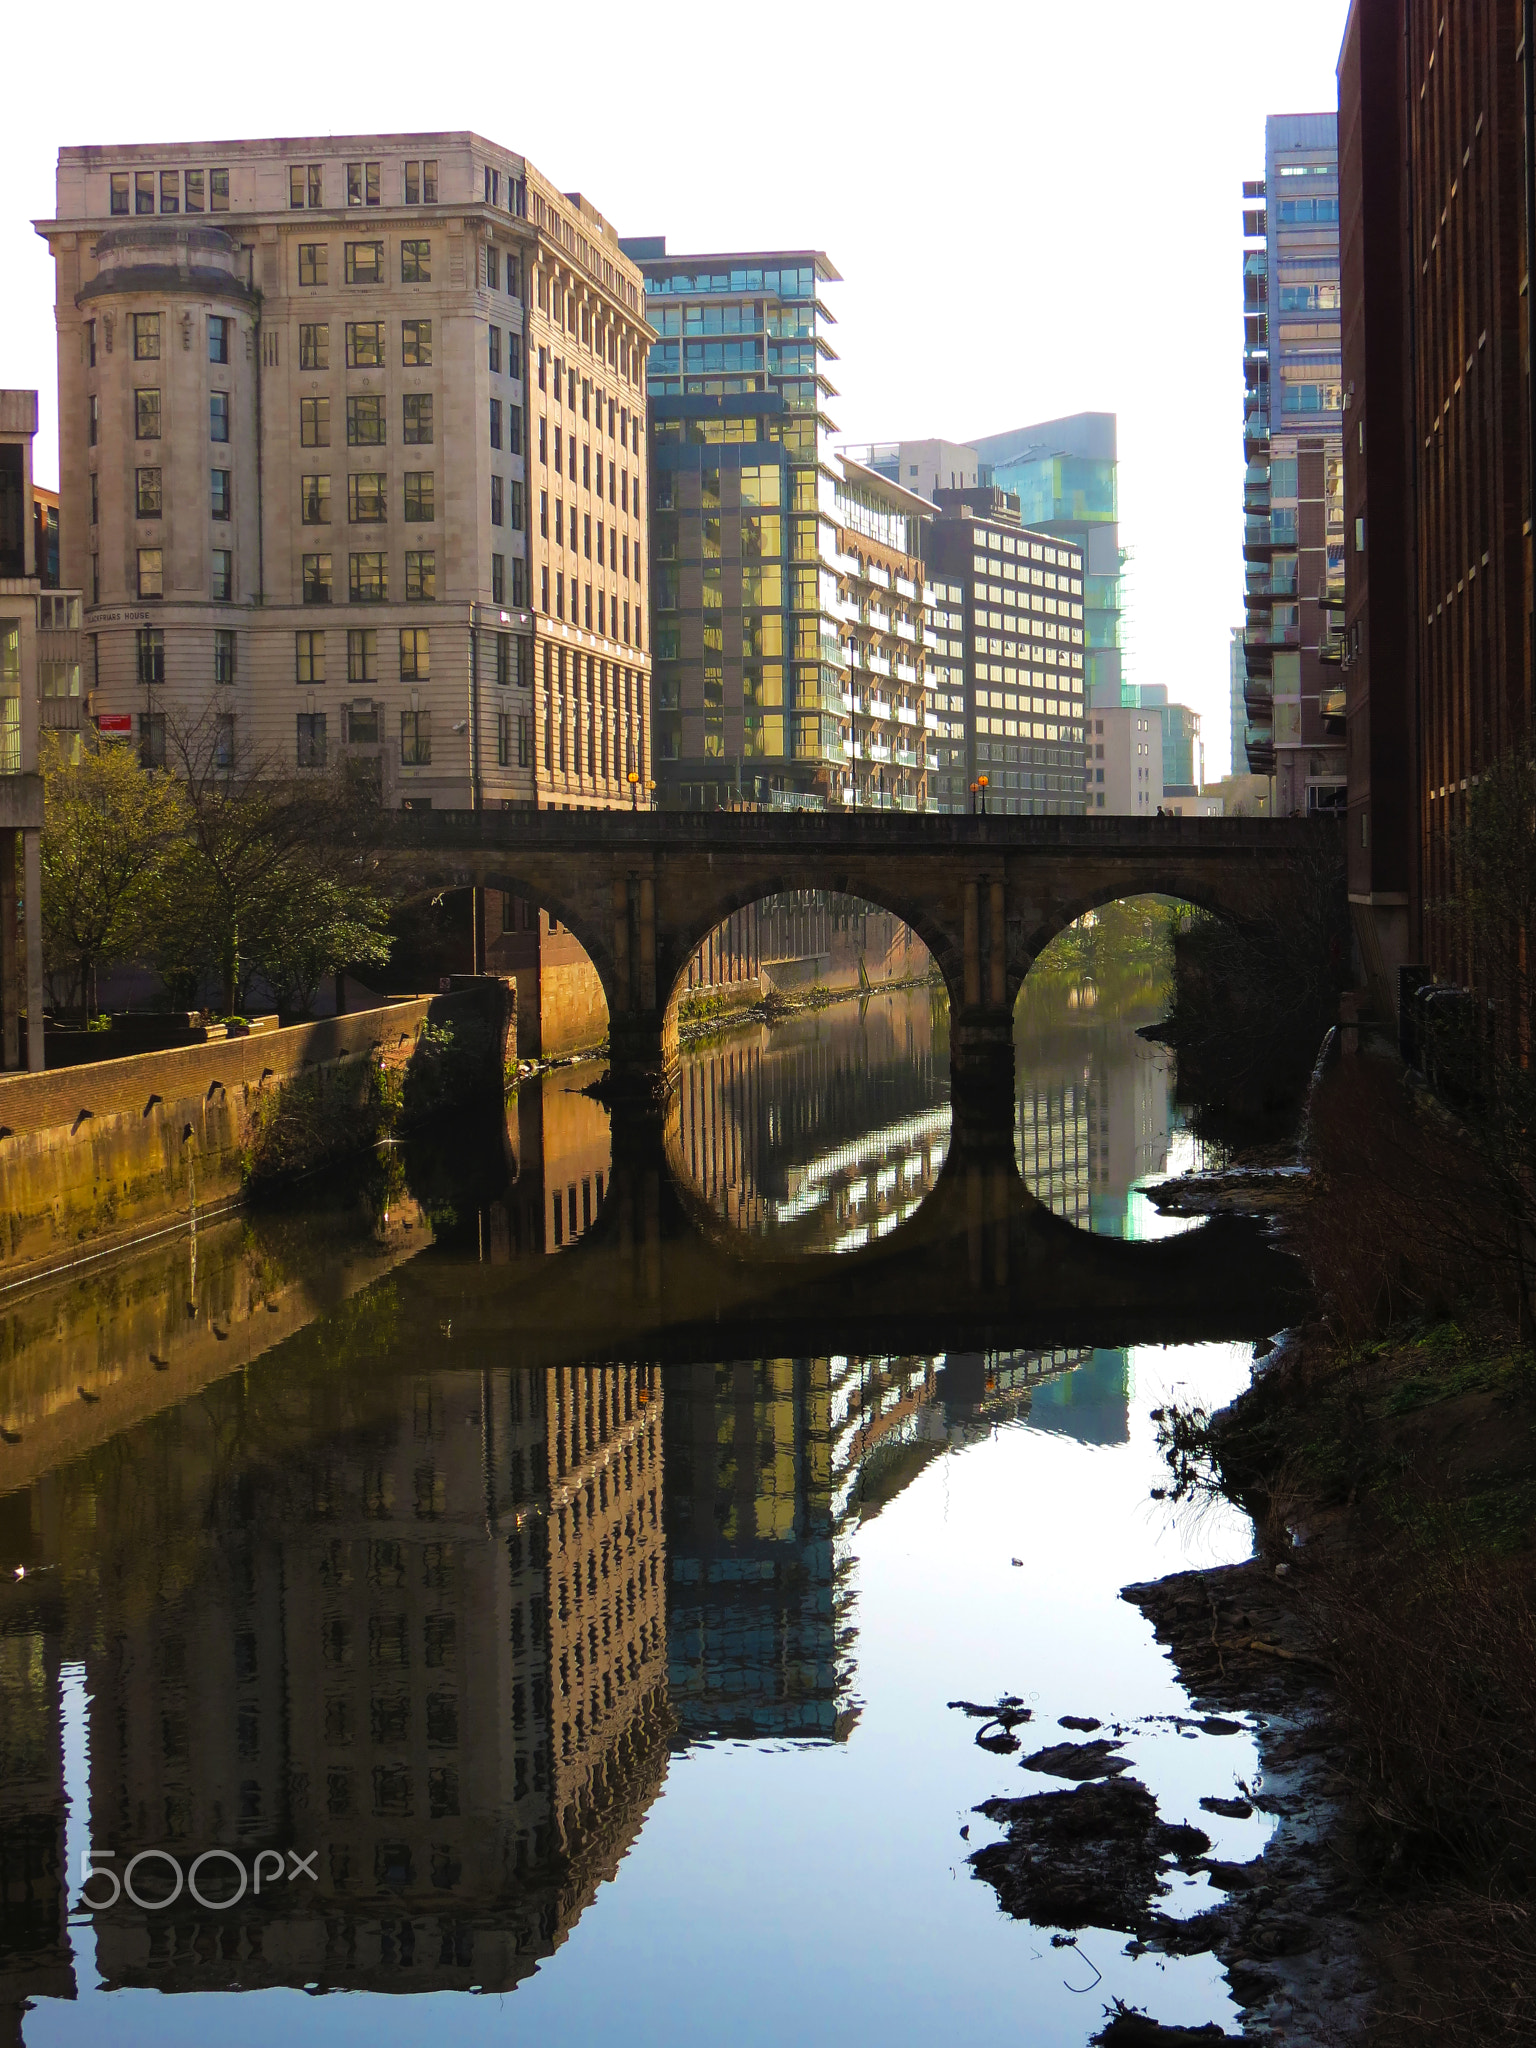 Manchester, UK - 27/03/2012: The peaceful view of the River Irwell canal under the sunlight